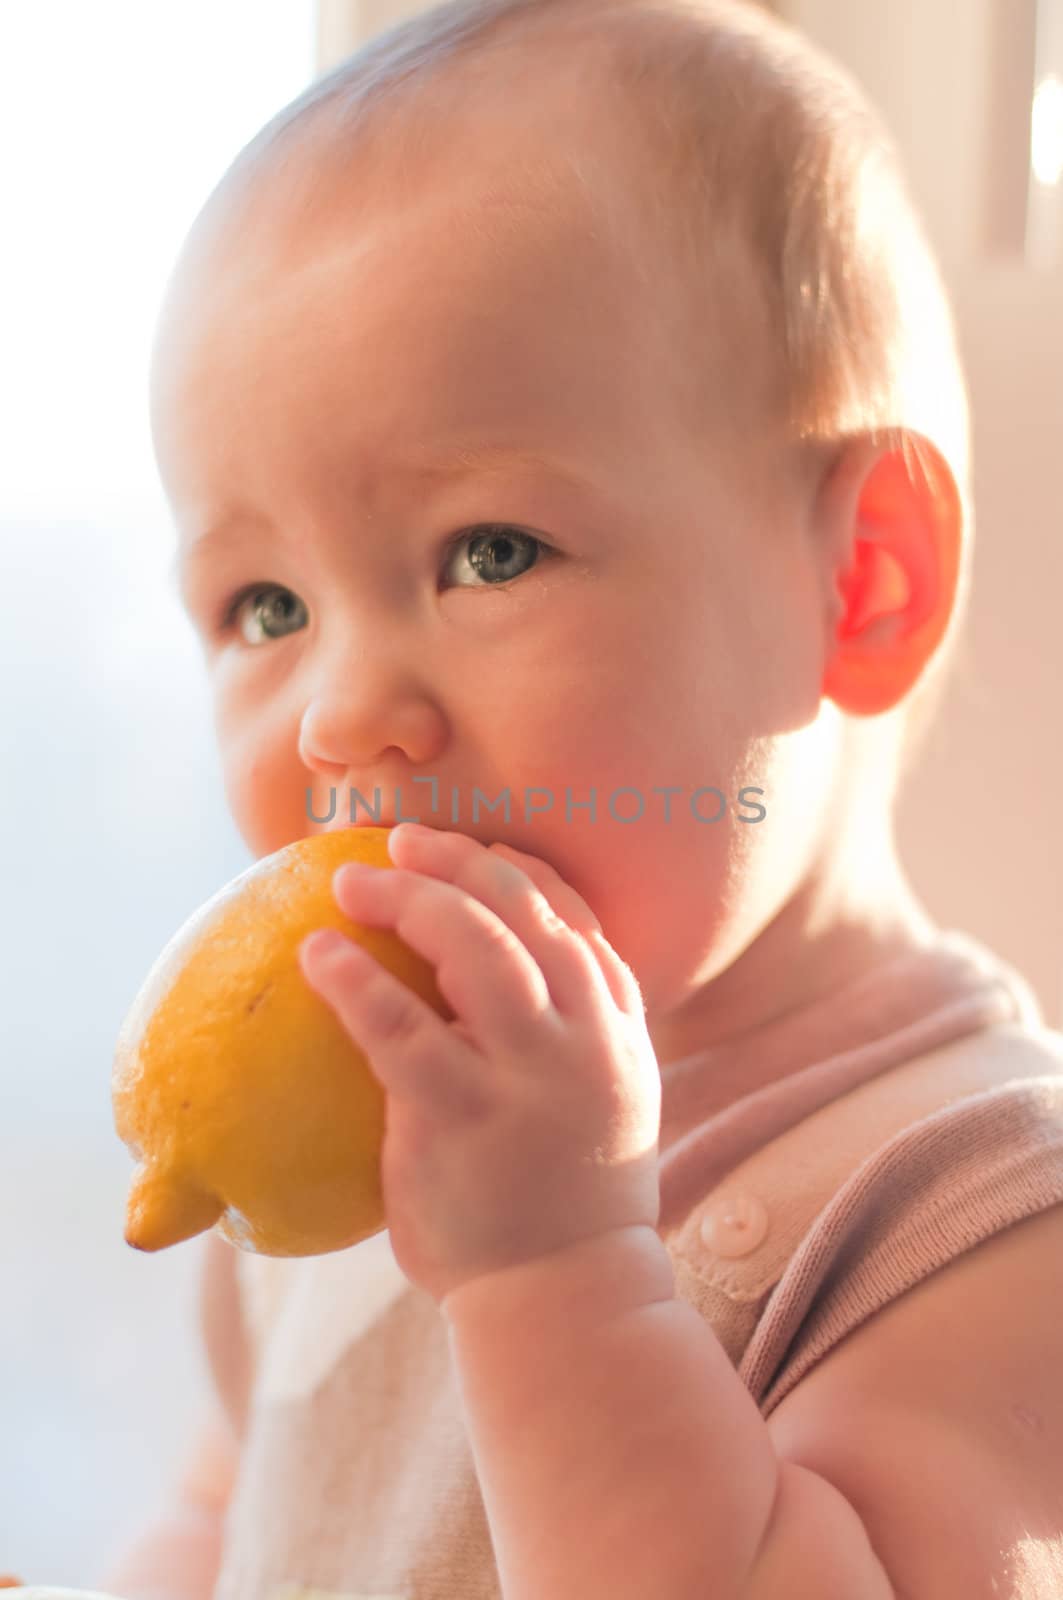 Baby girl with lemon in her hand